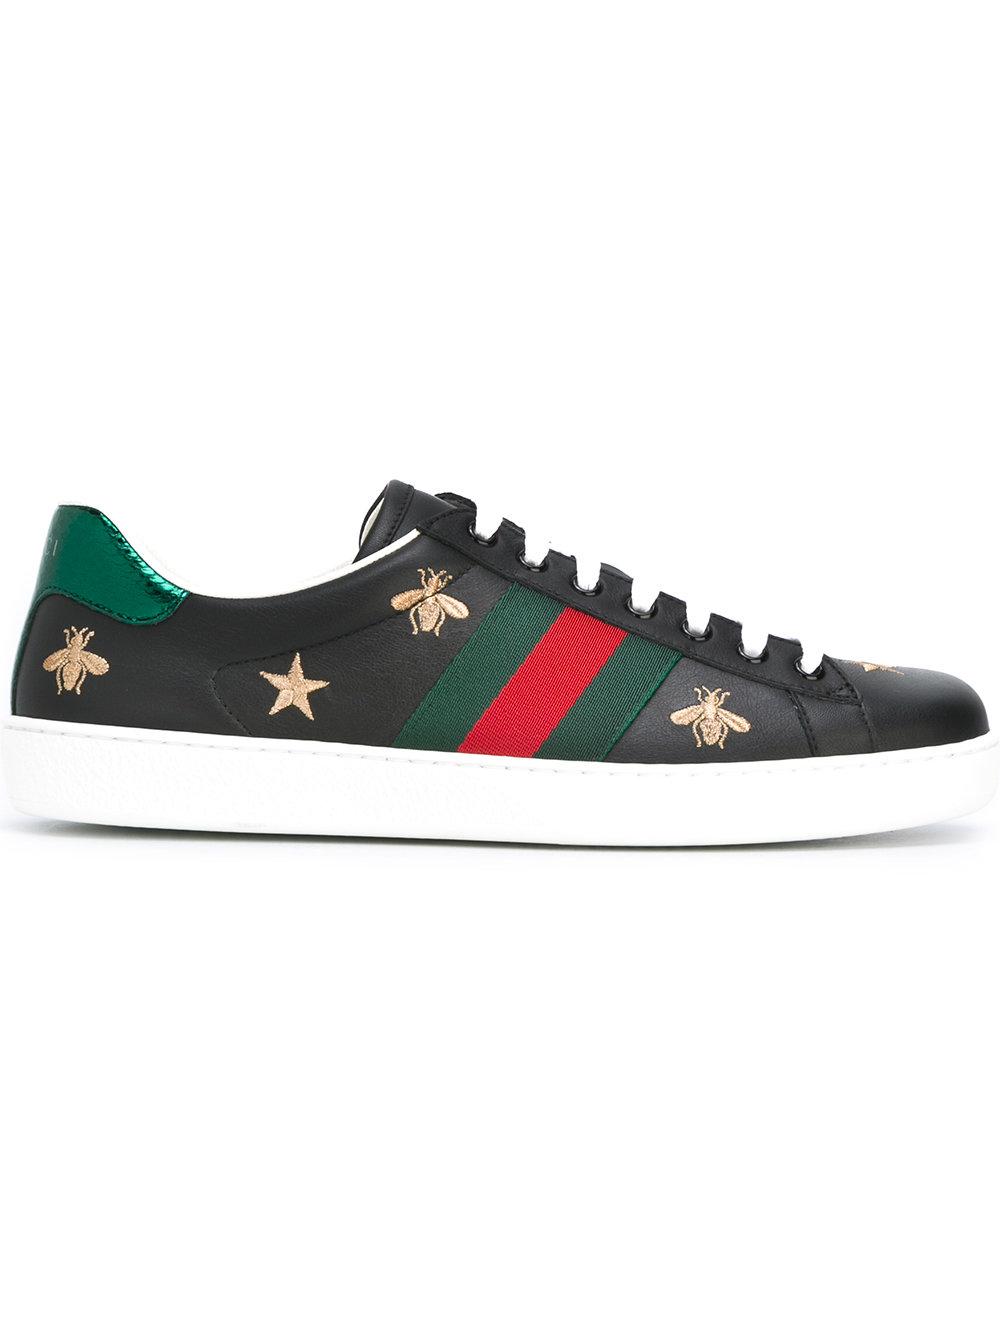 Gucci Ace Embroidered Sneakers in Black for Men | Lyst